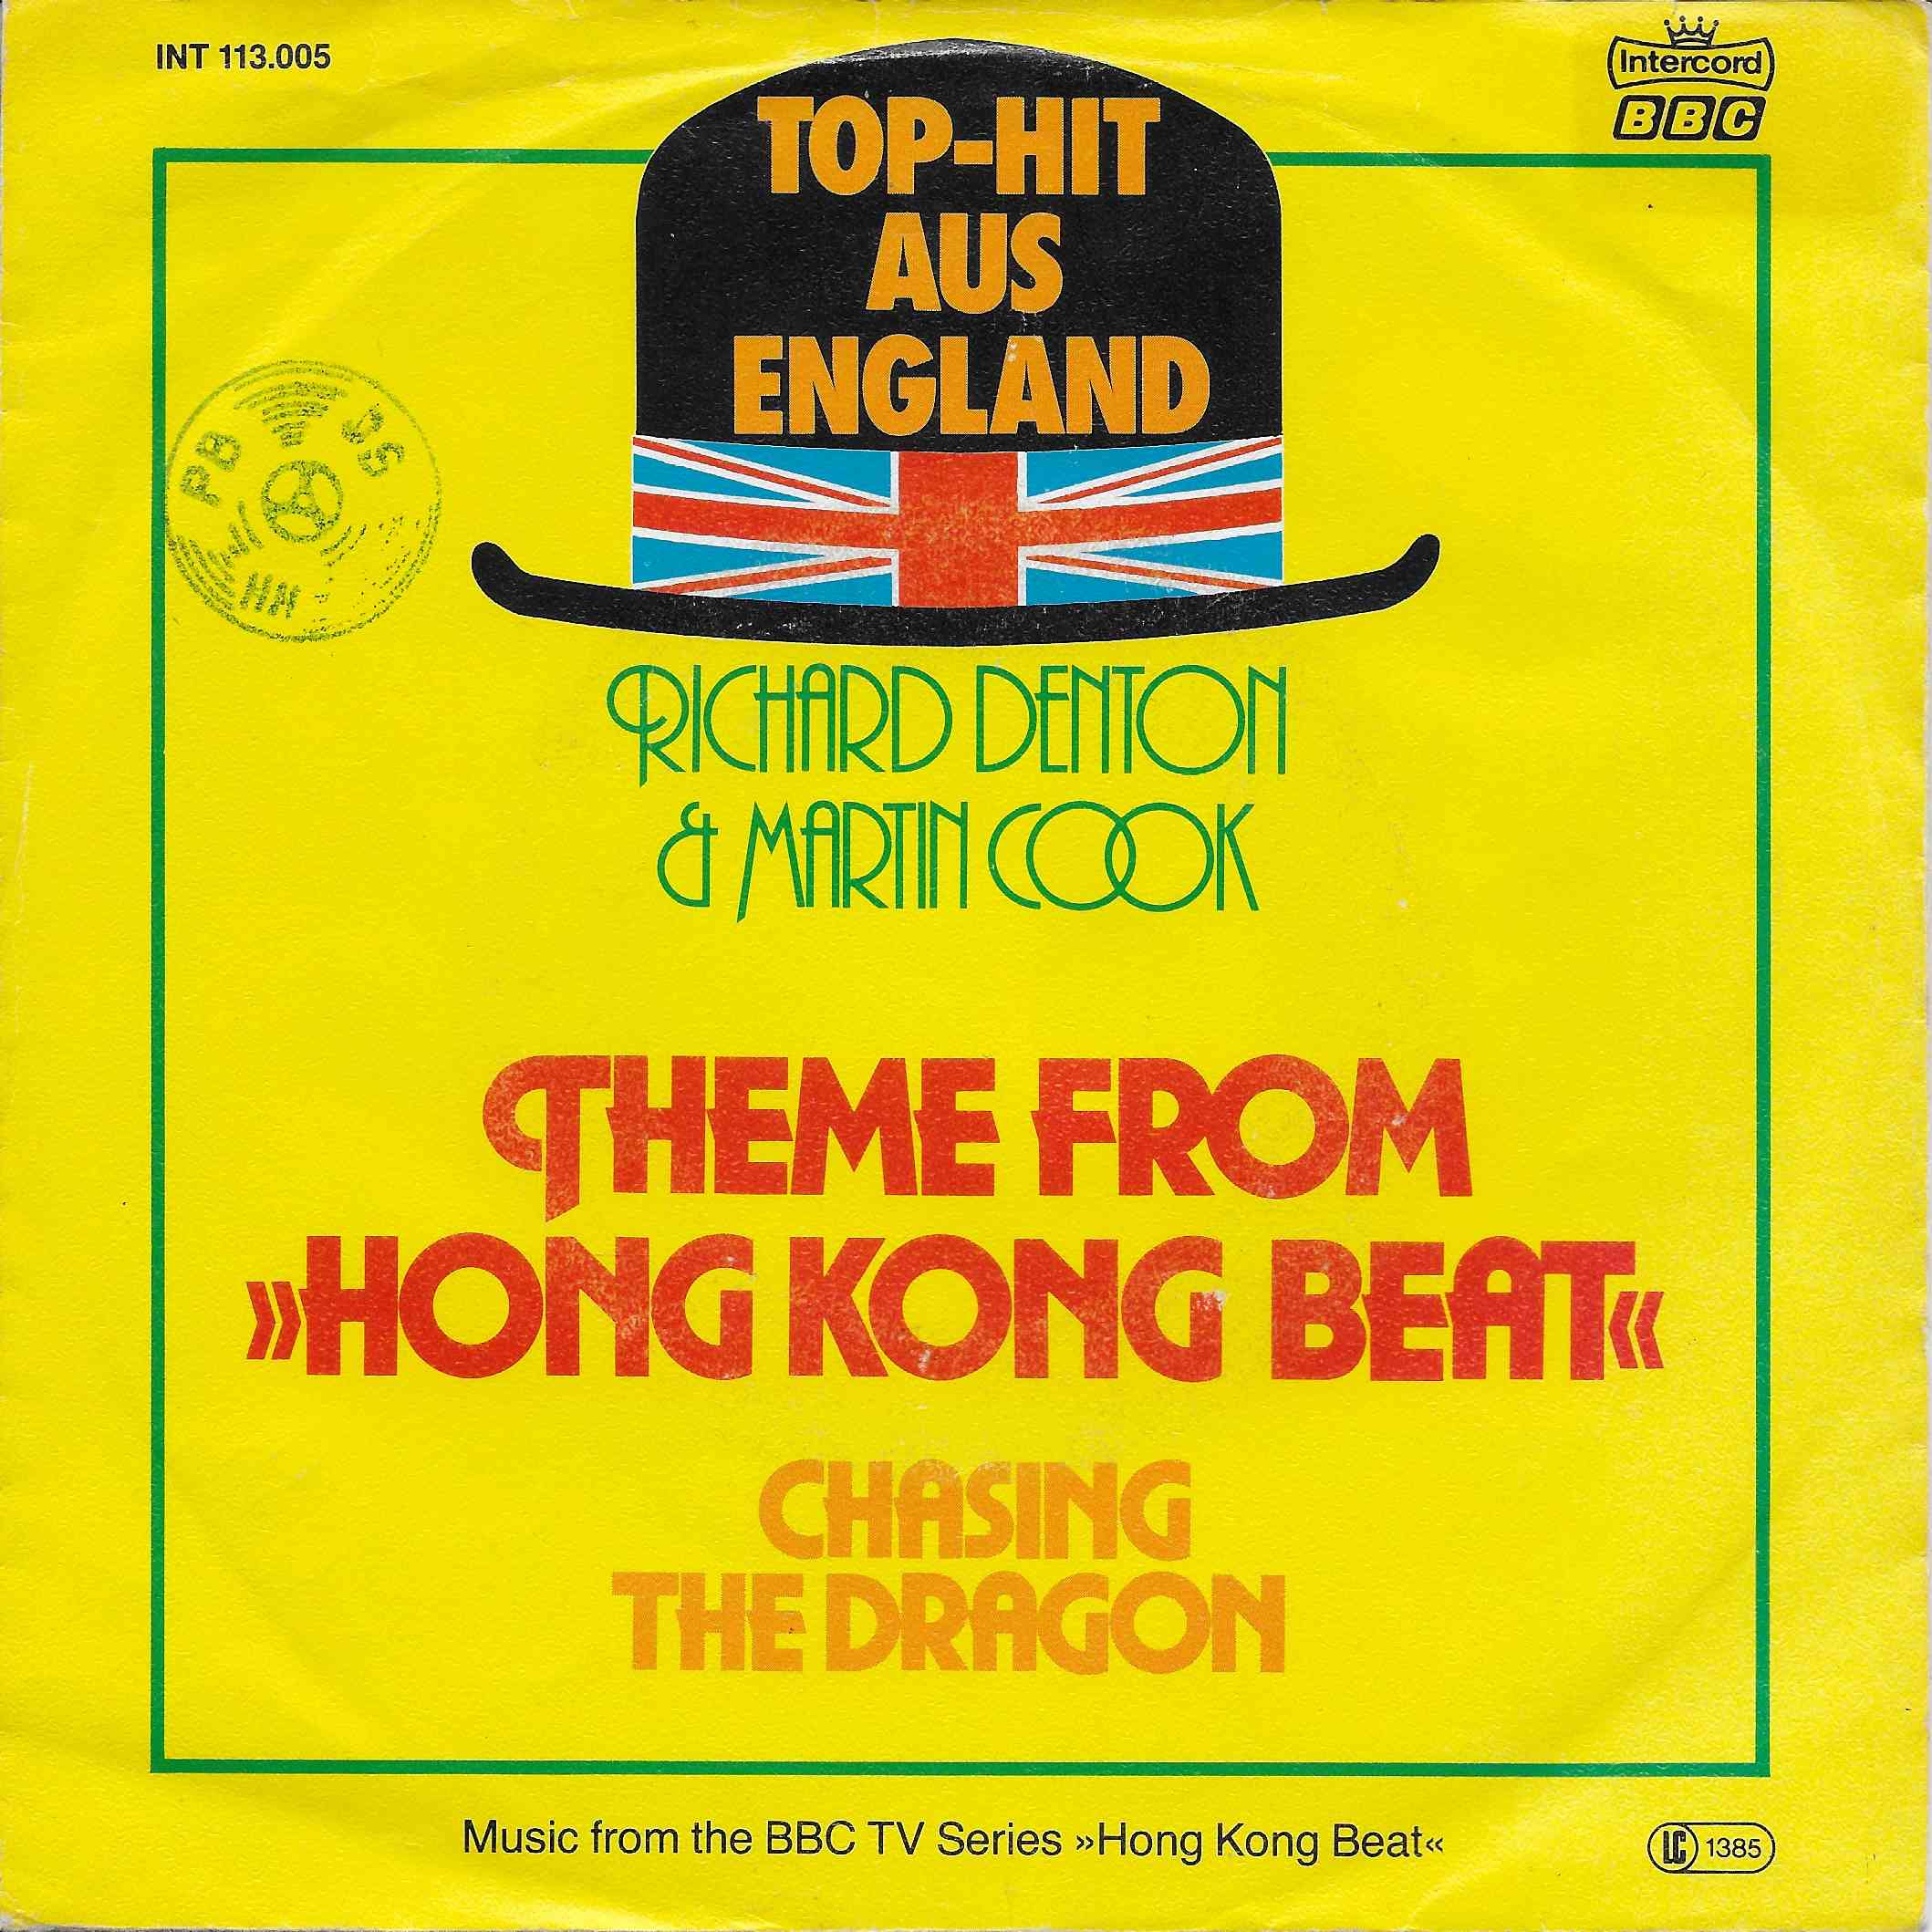 Picture of INT 113.005 Hong Kong beat (German import) by artist Richard Denton / Martin Cook from the BBC records and Tapes library